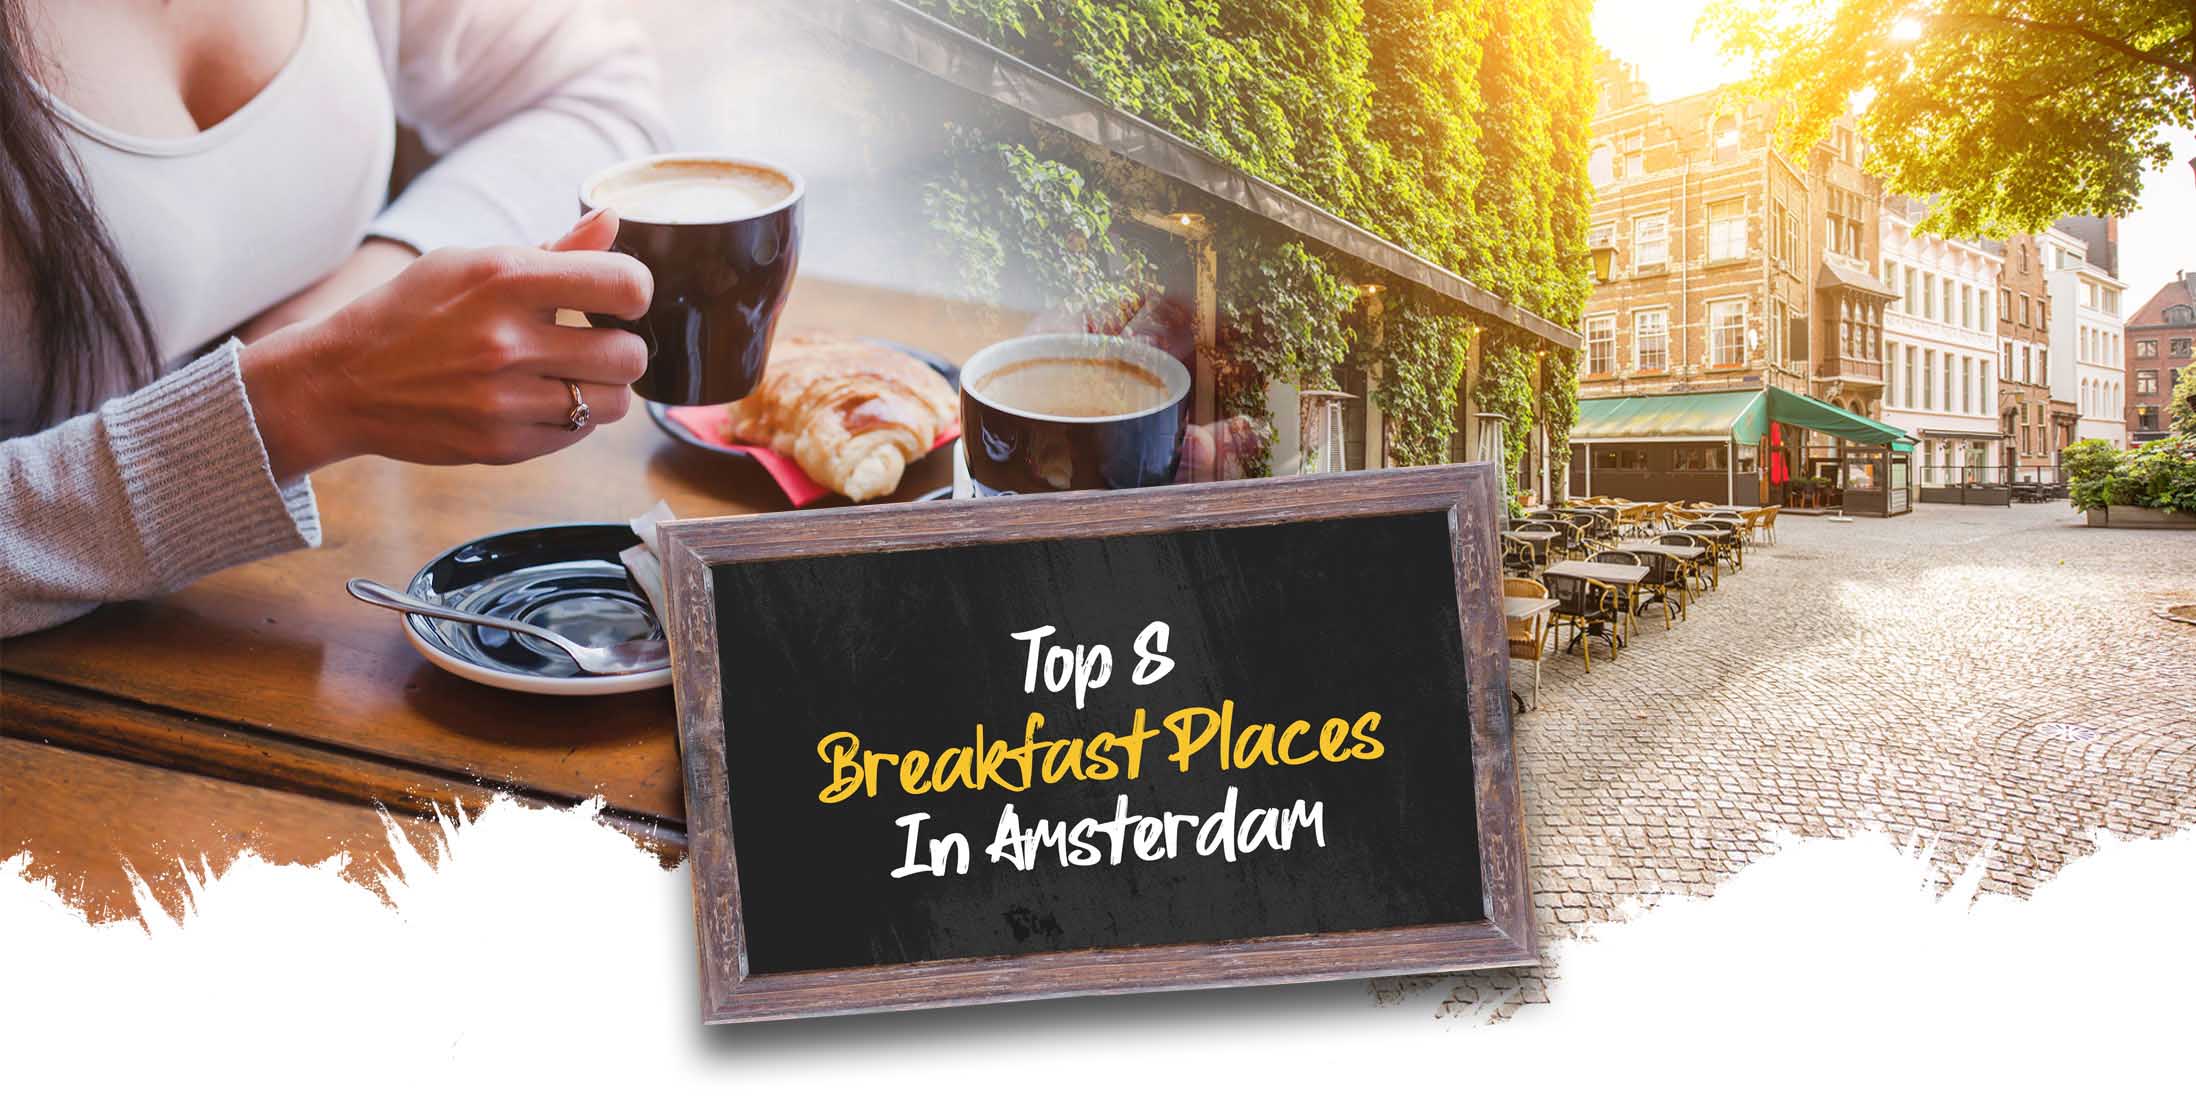 Top 8 Breakfast Places in Amsterdam